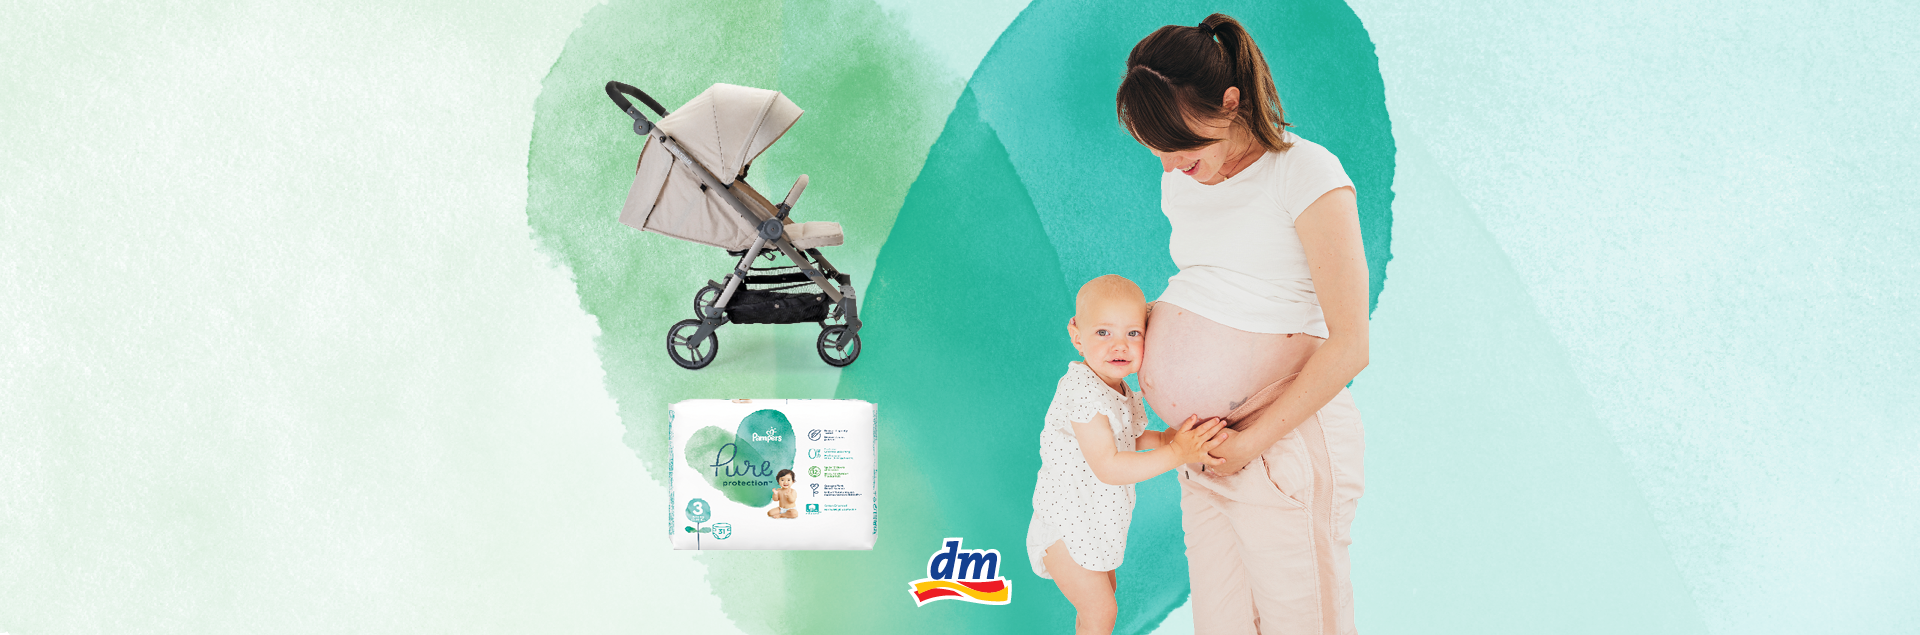 PAMPERS PURE DM